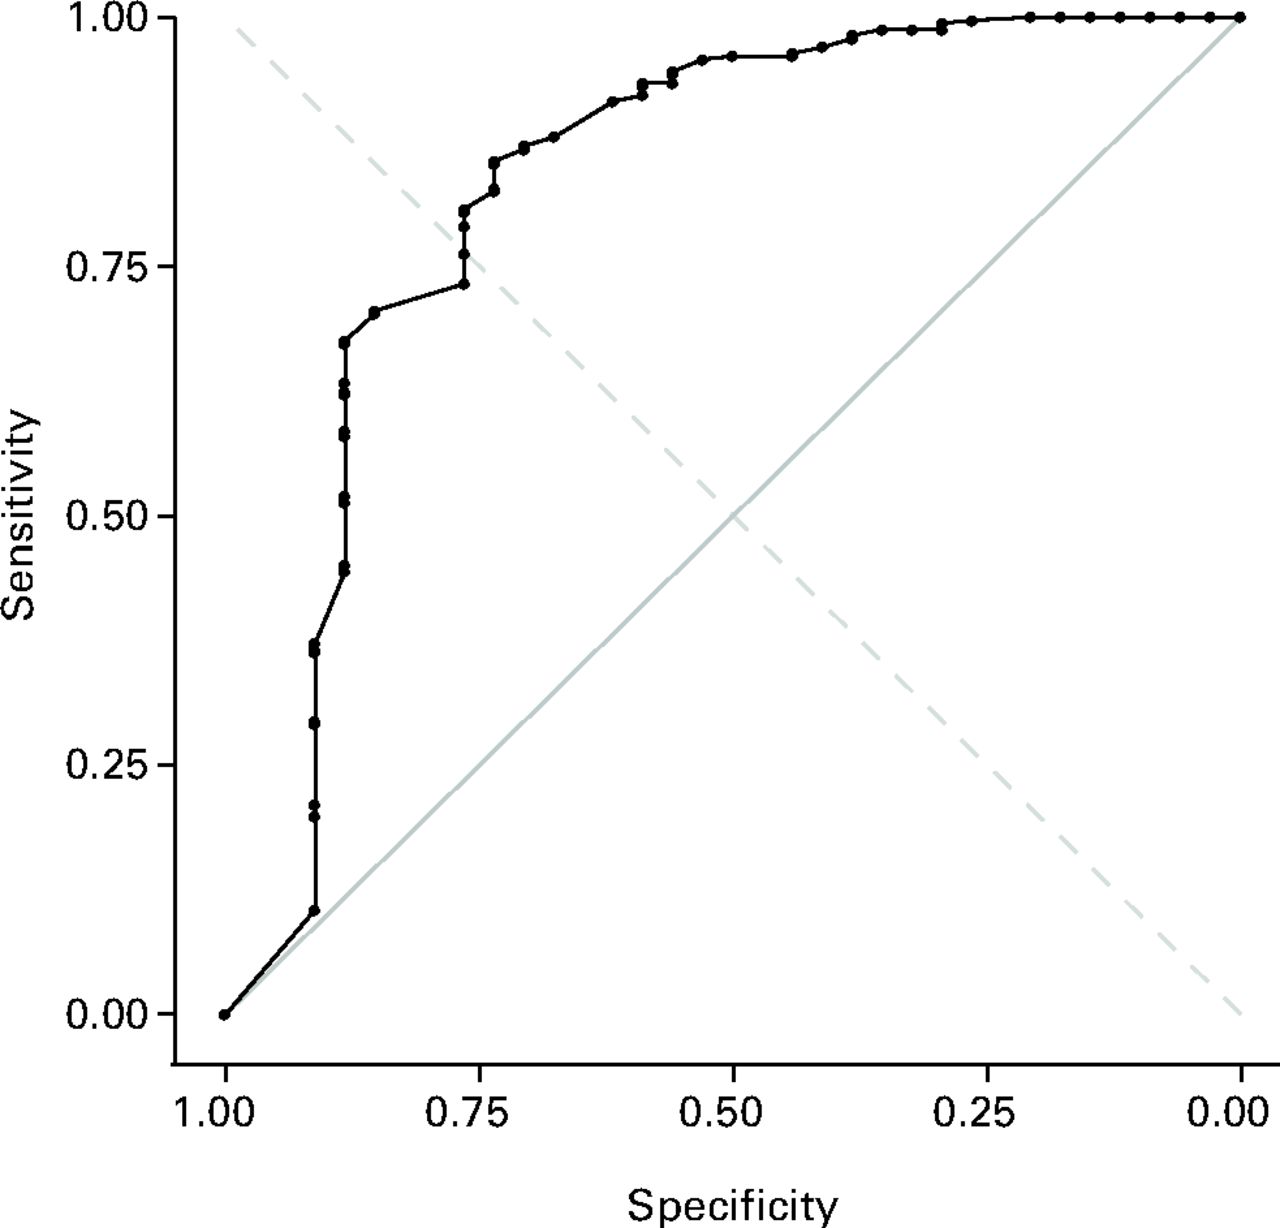 Fig. 2 
          Receiver operating characteristic (ROC)
curve to establish a threshold for the mid-term follow-up Oxford
hip score associated with mid-term satisfaction with surgery. Sensitivity
(76.3%) and specificity (76.5%) are in equilibrium when a threshold
of 37 points is chosen. The area under ROC curve (AUC) was 0.83
(95% confidence interval 0.74 to 0.93).
        